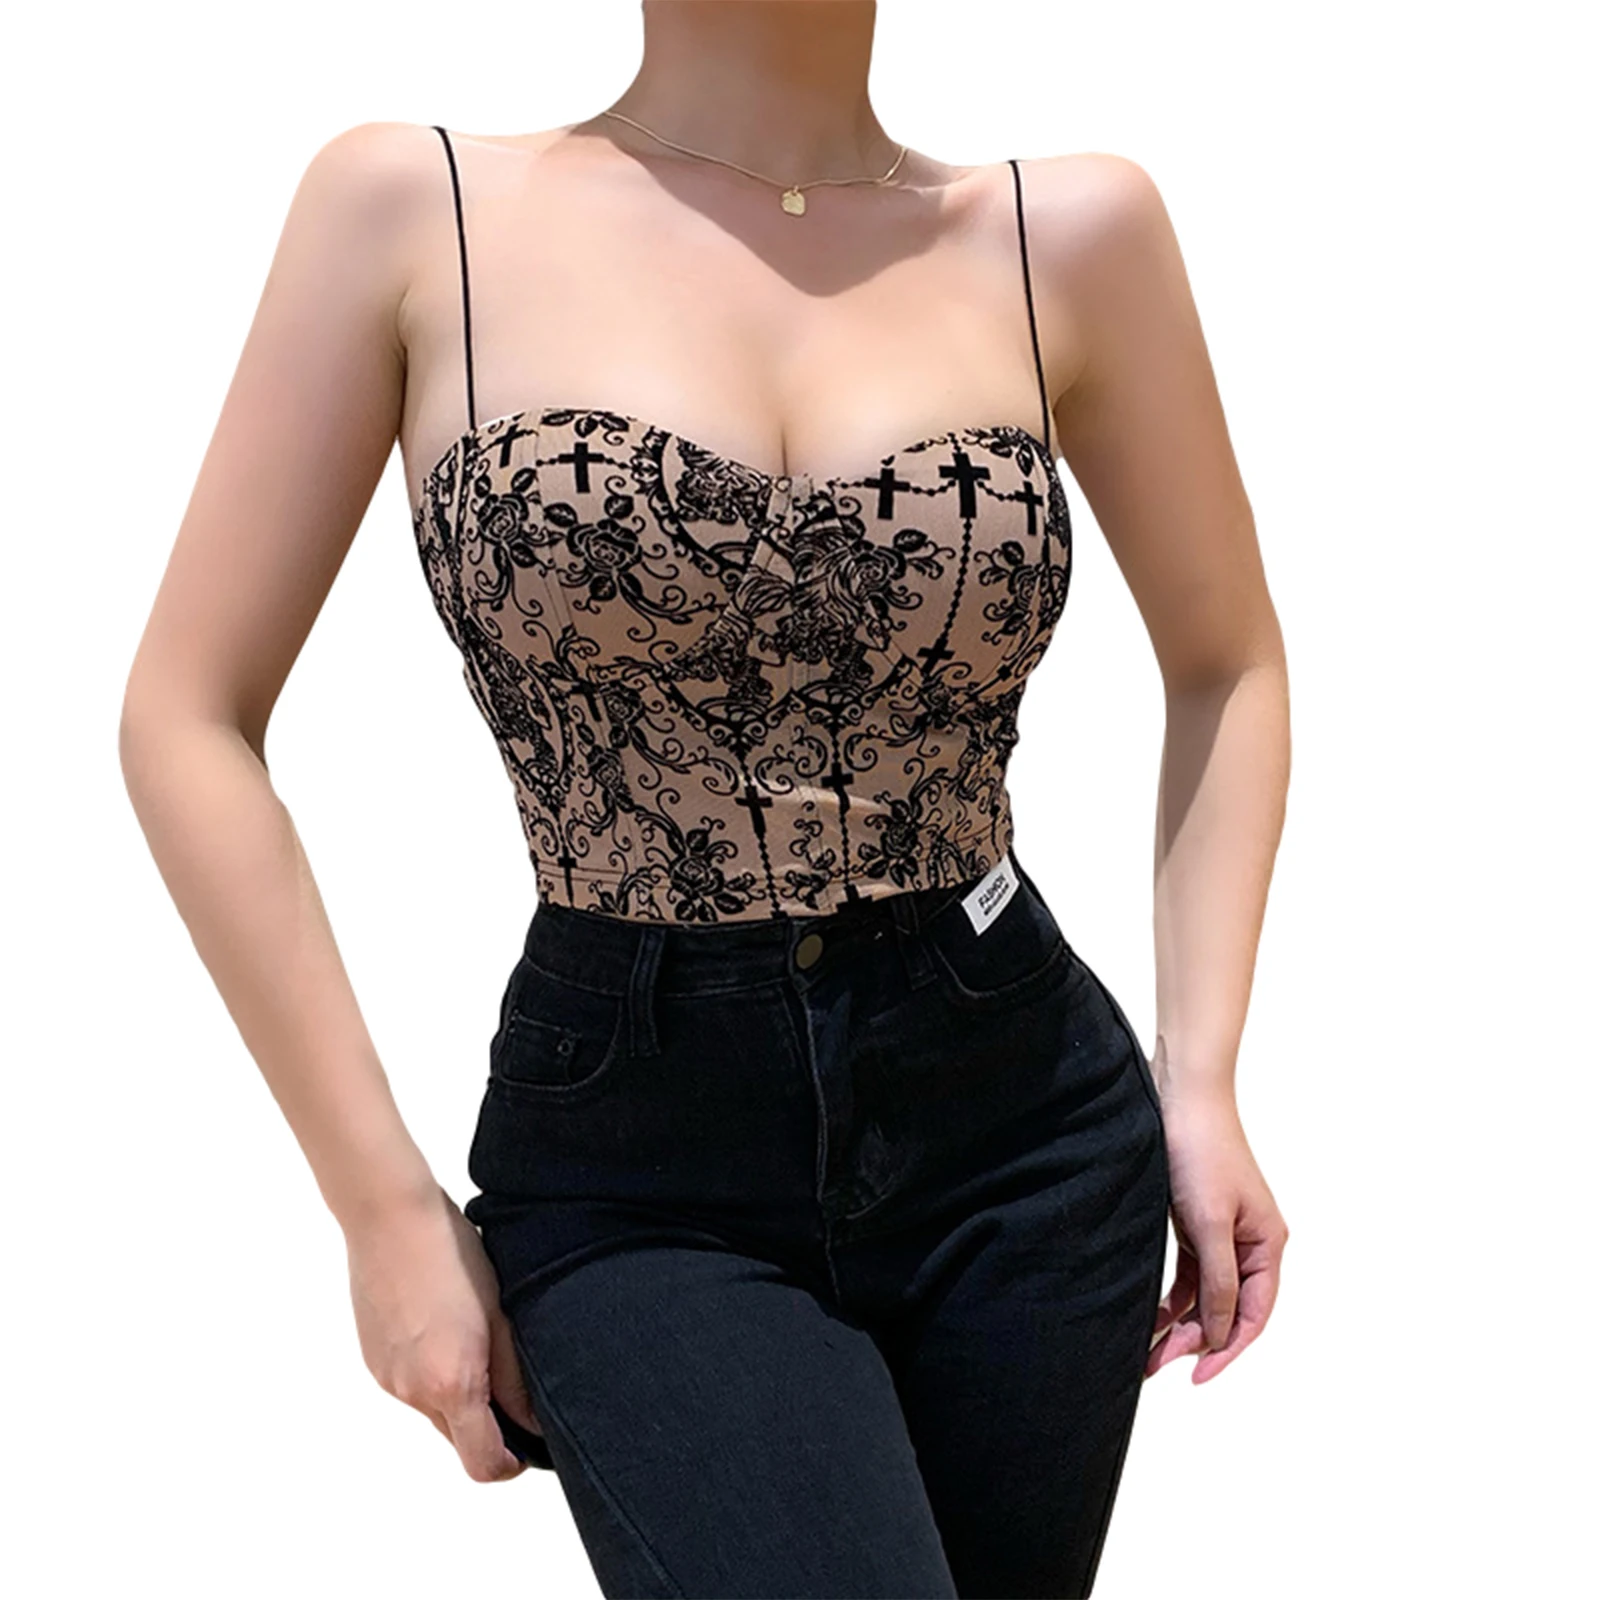 

Women’s Sexy V-neck Camisole Female Ladies Fashion Embroidered Backless Exposed Navel Suspender Tops